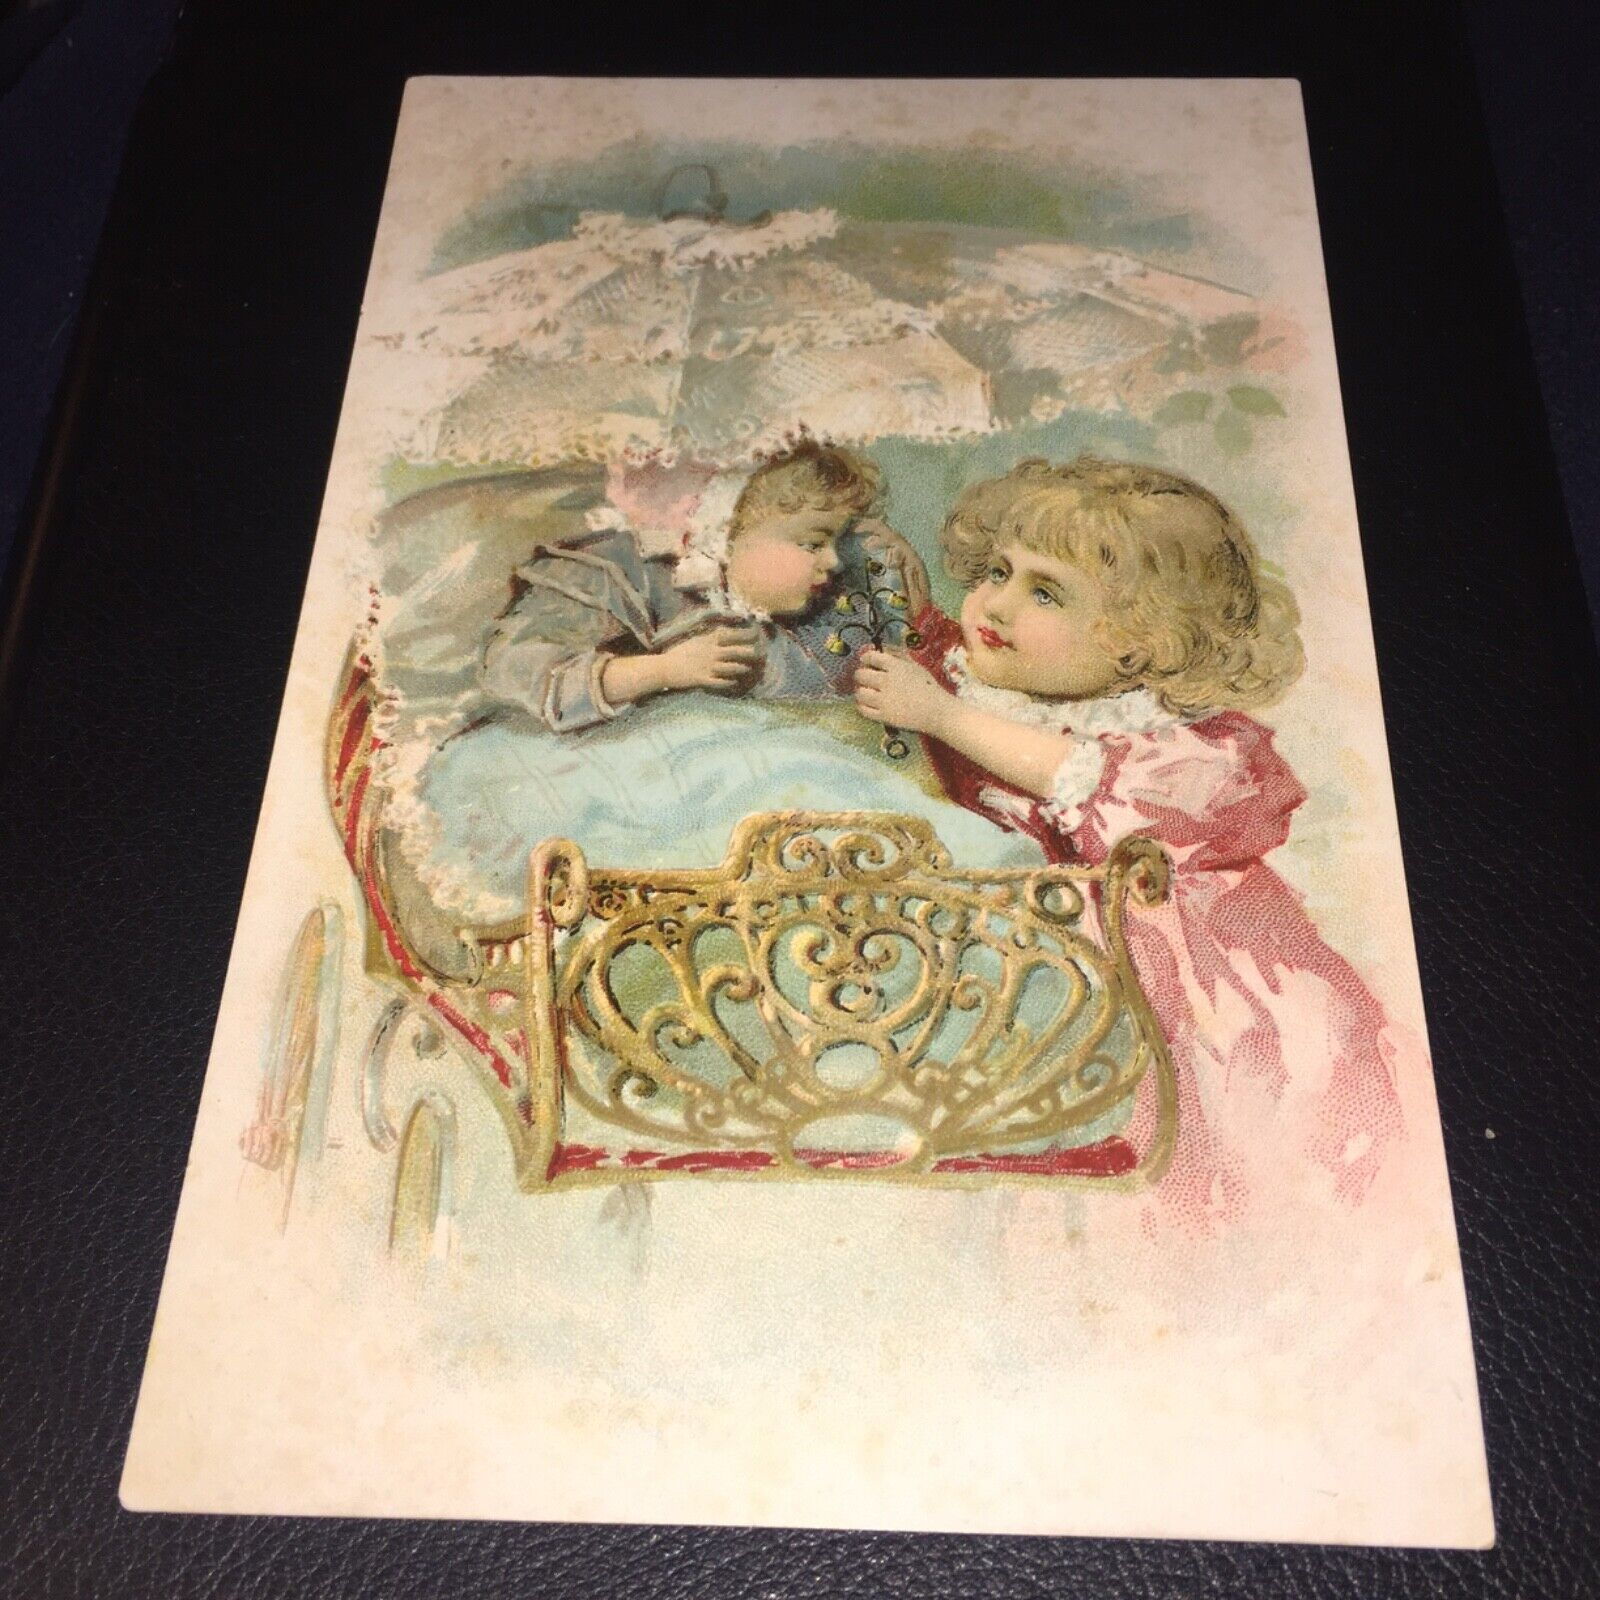 VICTORIAN 1880’s BABY IN STROLLER WITH SISTER HOLDING AN UMBRELLA OVER HER CARD